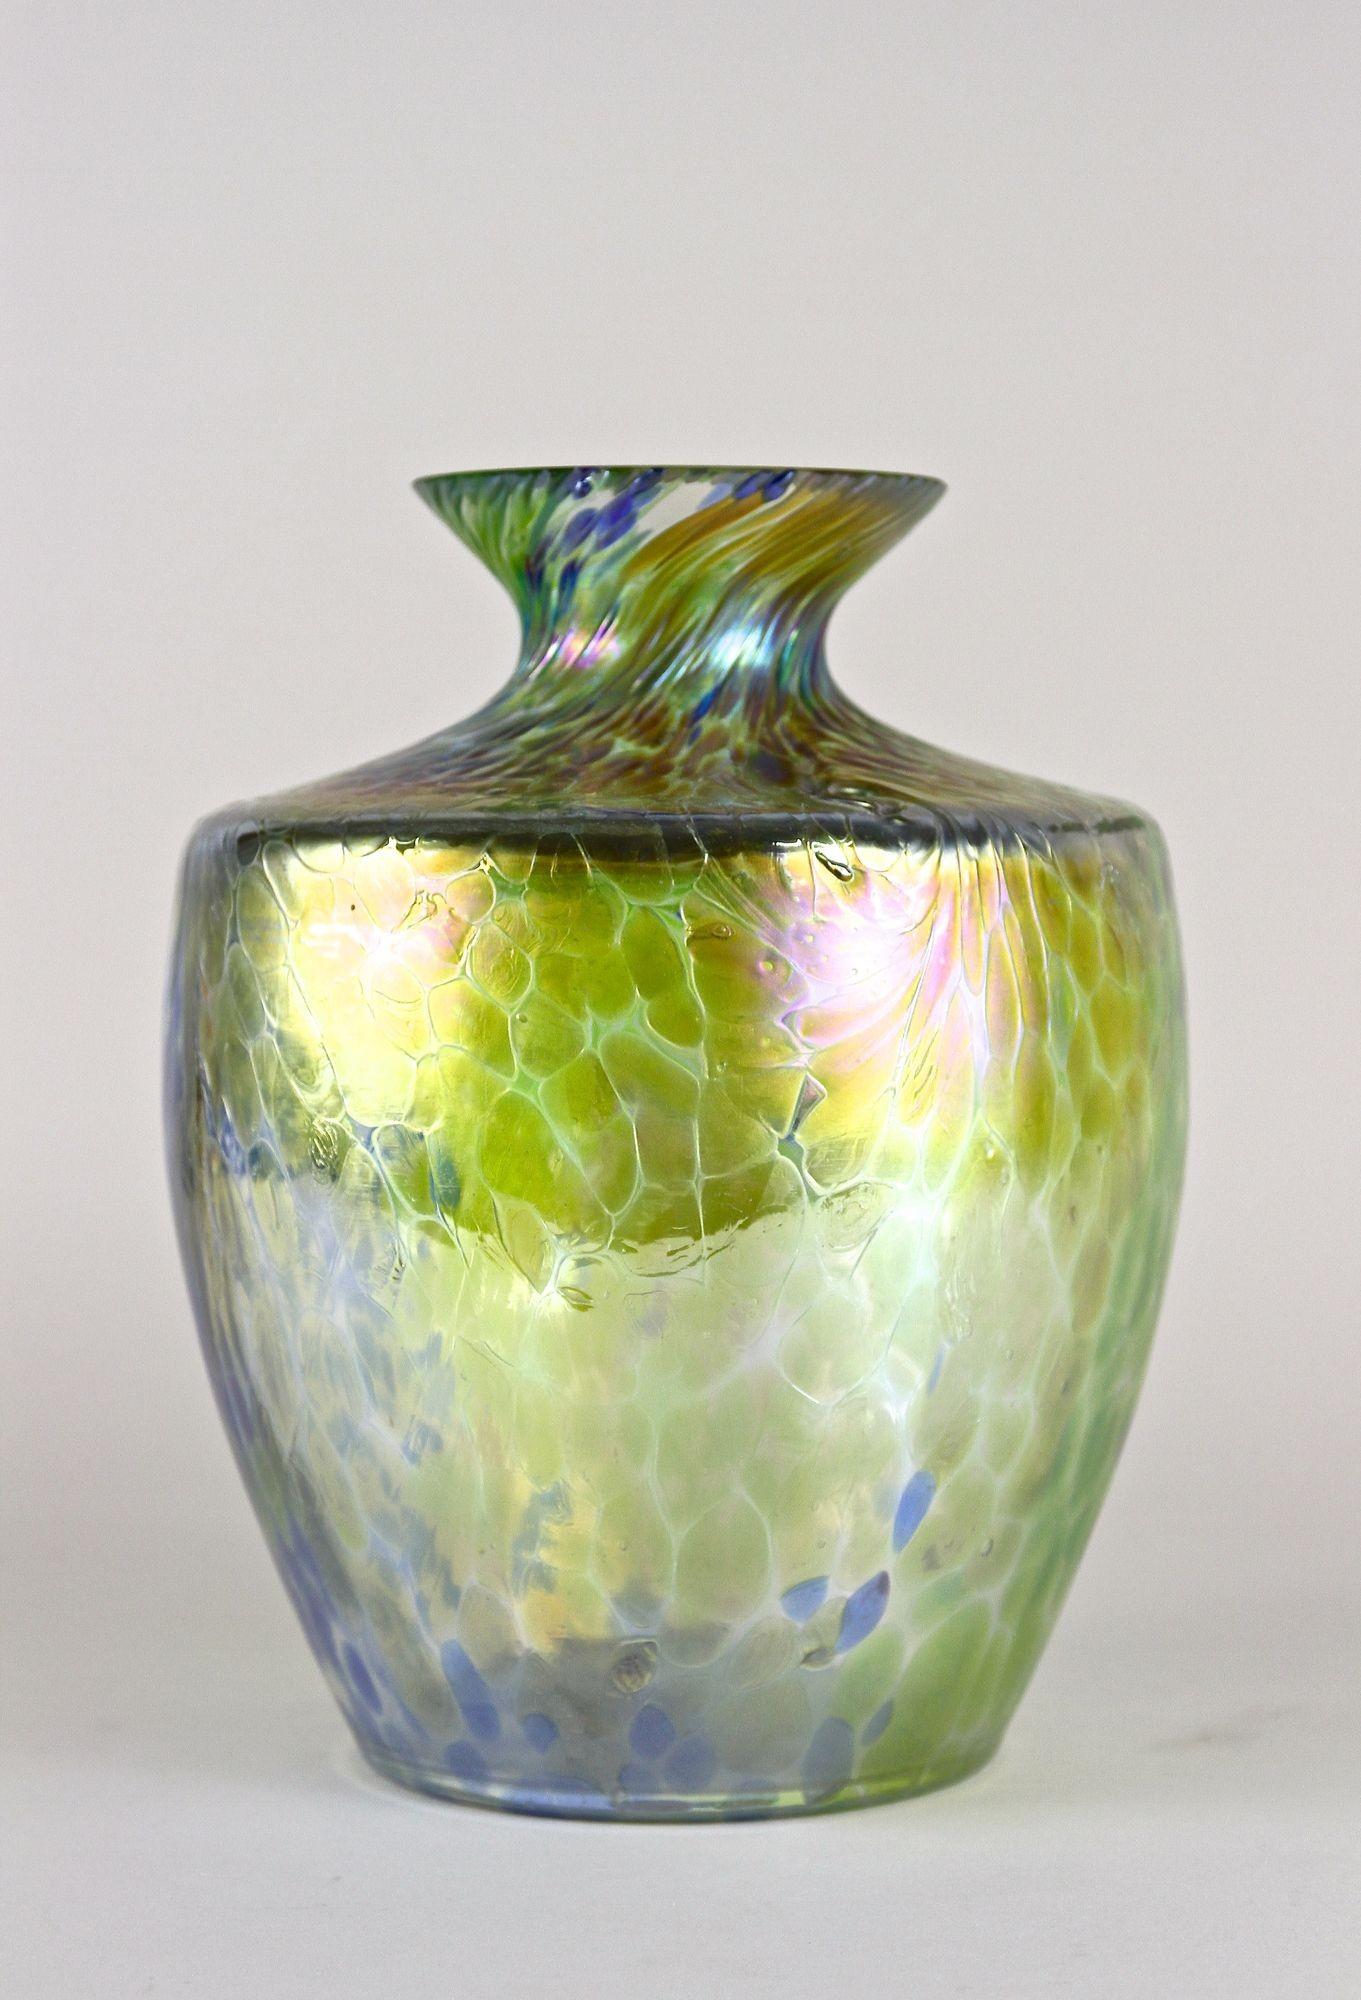 Iridescent Art Nouveau Glass Vase Attributed To Fritz Heckert, Bohemia ca. 1905 For Sale 6